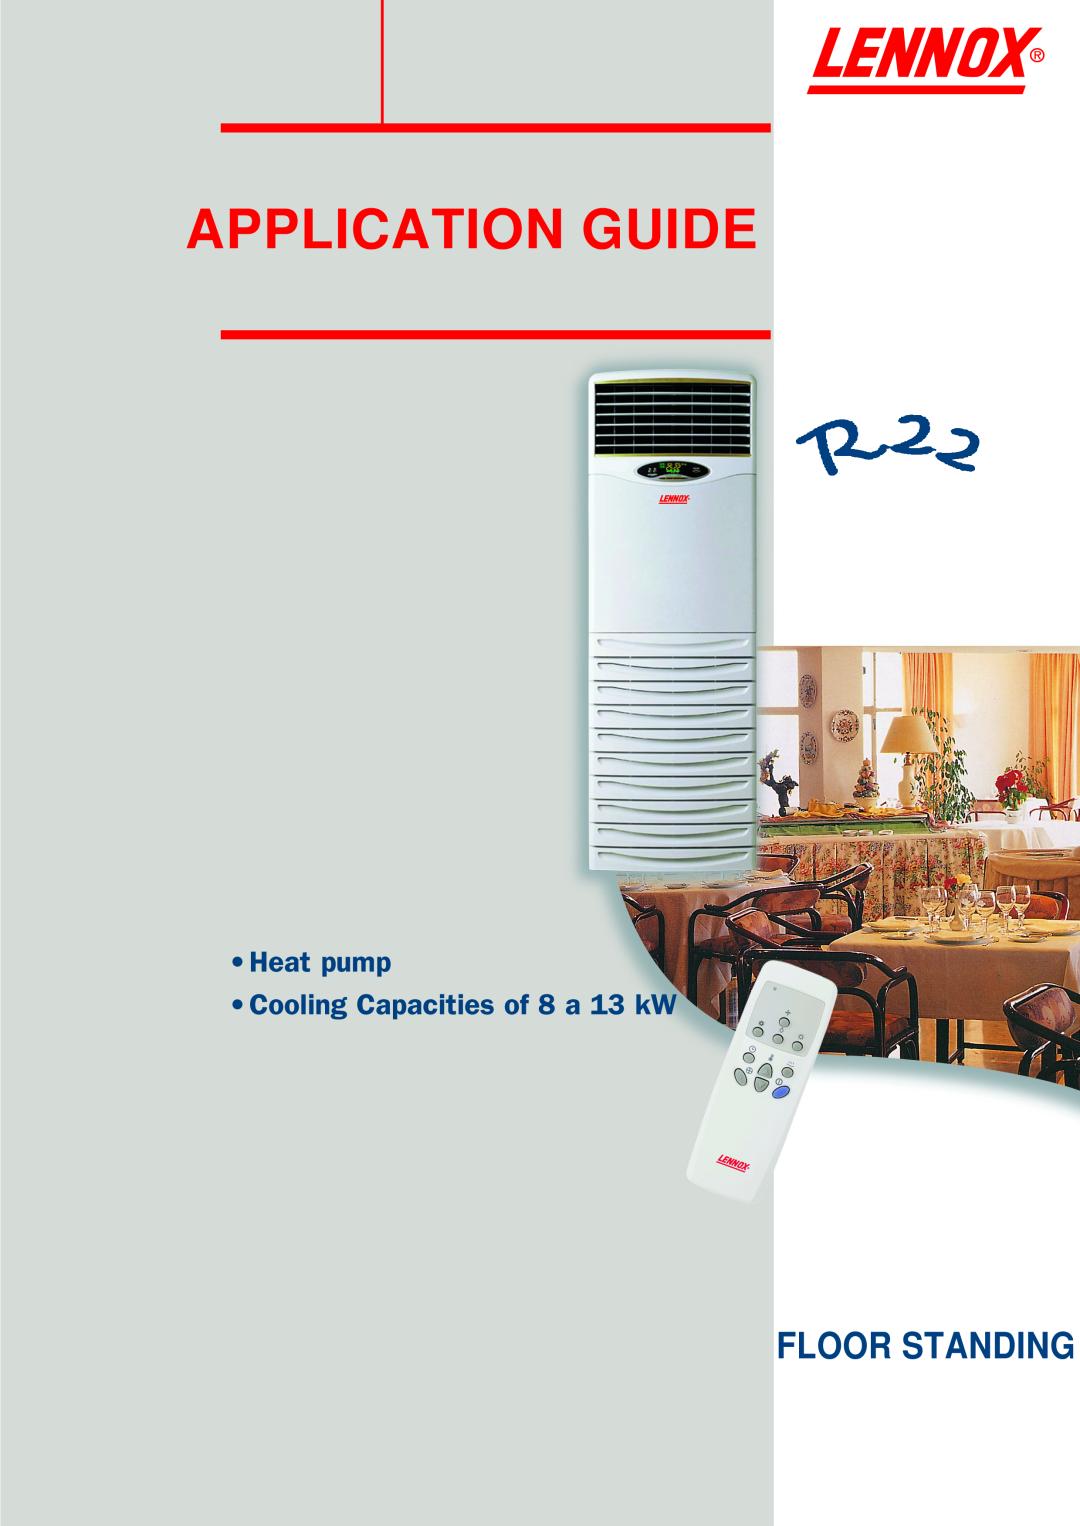 Lennox International Inc R22 manual Application Guide, Floor Standing, Heat pump Cooling Capacities of 8 a 13 kW 